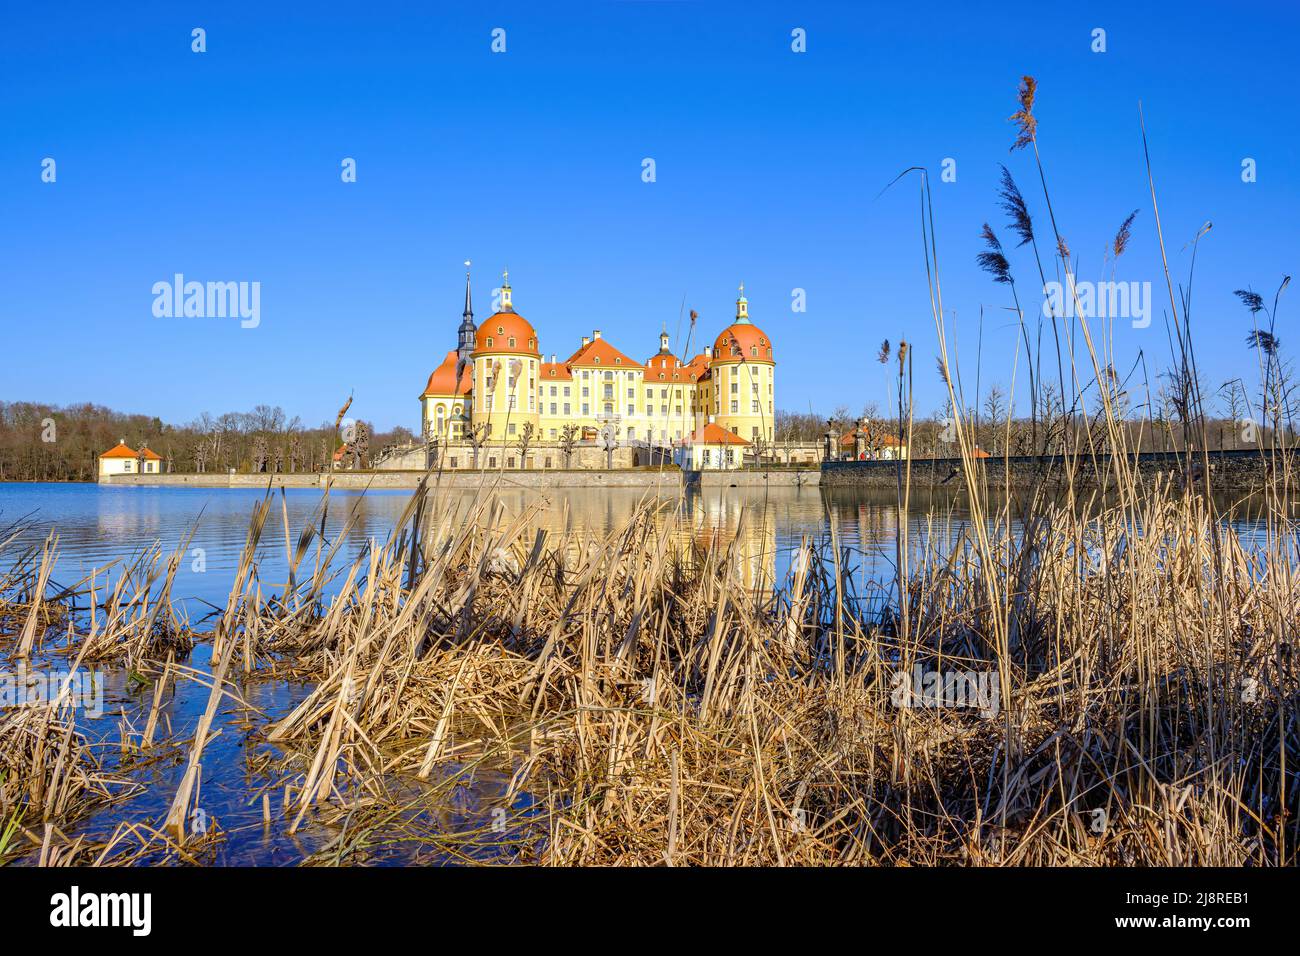 Picturesque view from the South of Moritzburg Palace in Moritzburg near Dresden, Saxony, Germany. Stock Photo